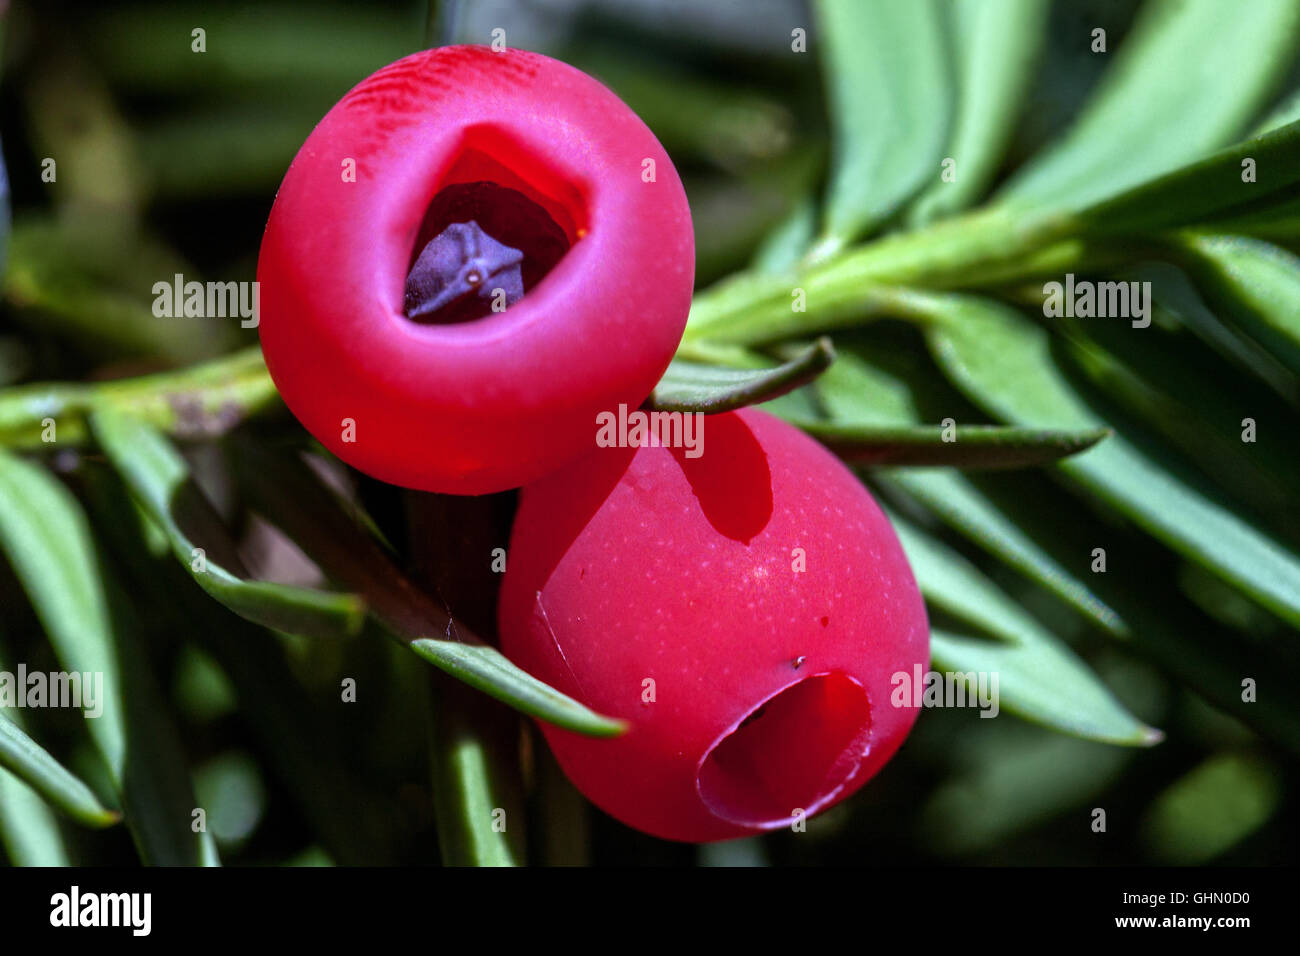 Taxus baccata, European yew, shoot with mature cones, yew berry Stock Photo